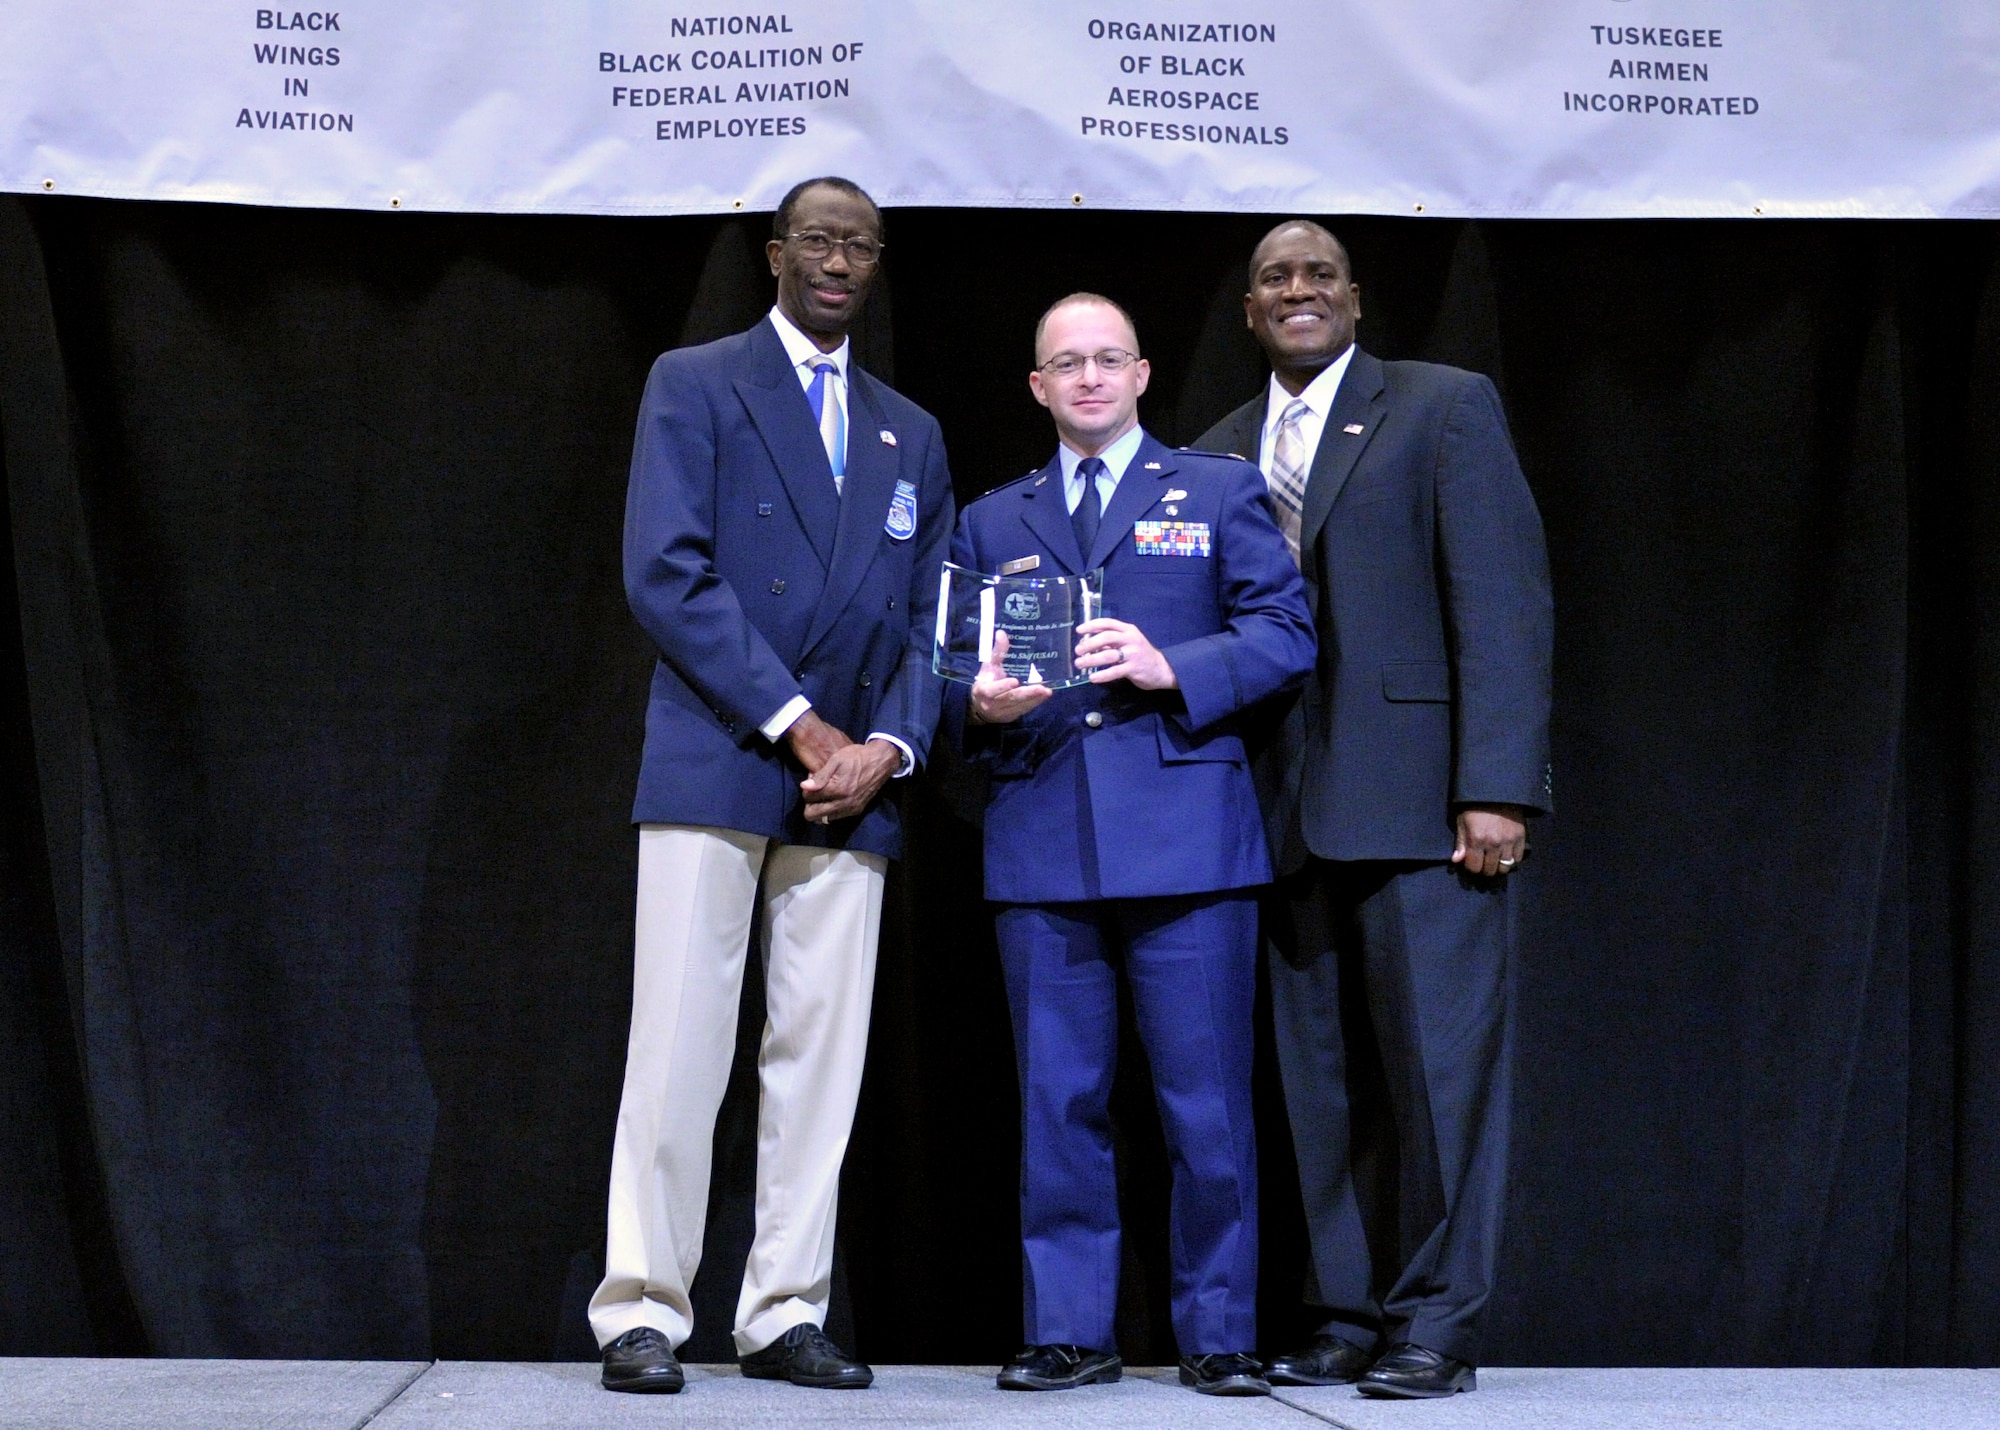 Major Boris Shif, (center) was awarded the General Benjamin O. Davis, Jr. Award.  Shif is the director of operations at the 316th Training Squadron, Goodfellow Air Force Base, Texas. Air Force, Retired Brig. Gen. Leon Johnson presented the award to Shif on behalf of Tuskegee Airmen, Inc. during the Military Luncheon, at the Las Vegas Hotel, Aug.1. (U.S. Air Force photo/A1C Colville McFee)